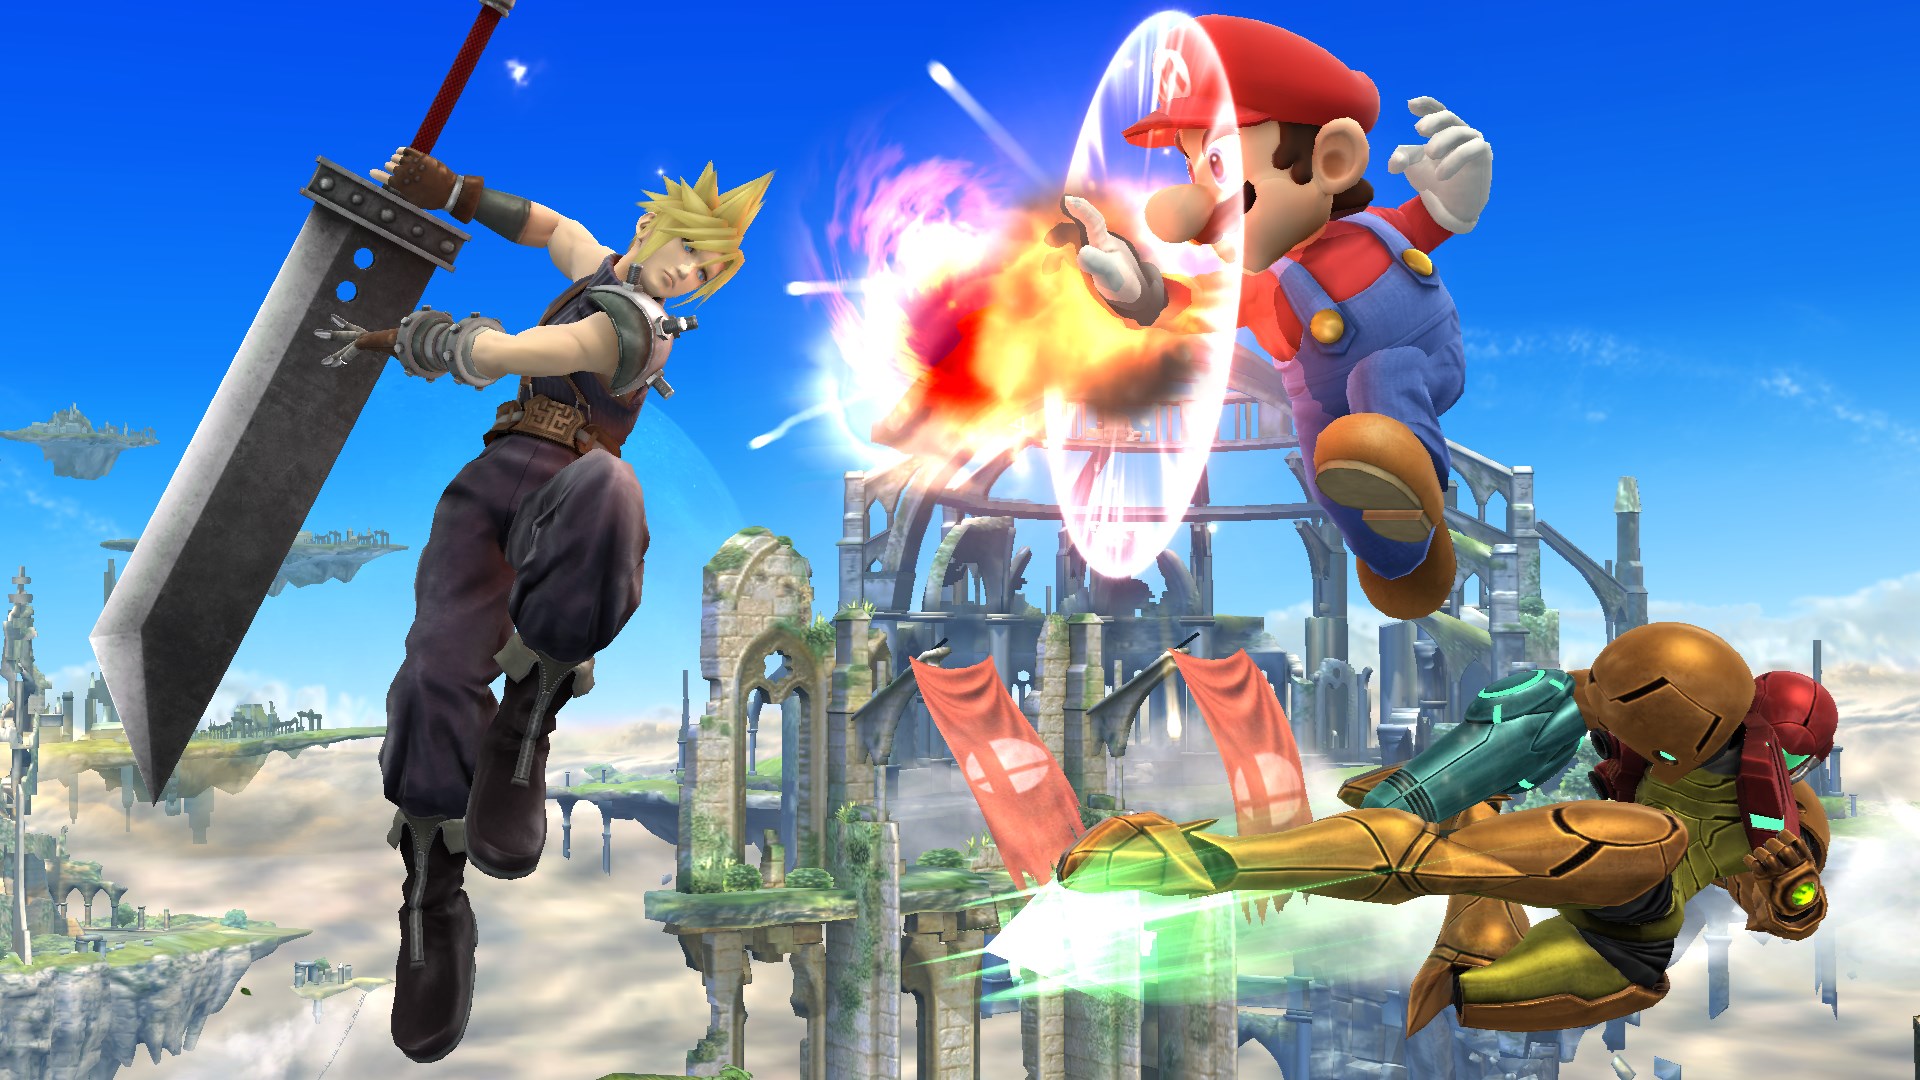 Super Smash Bros. for Wii U and 3DS